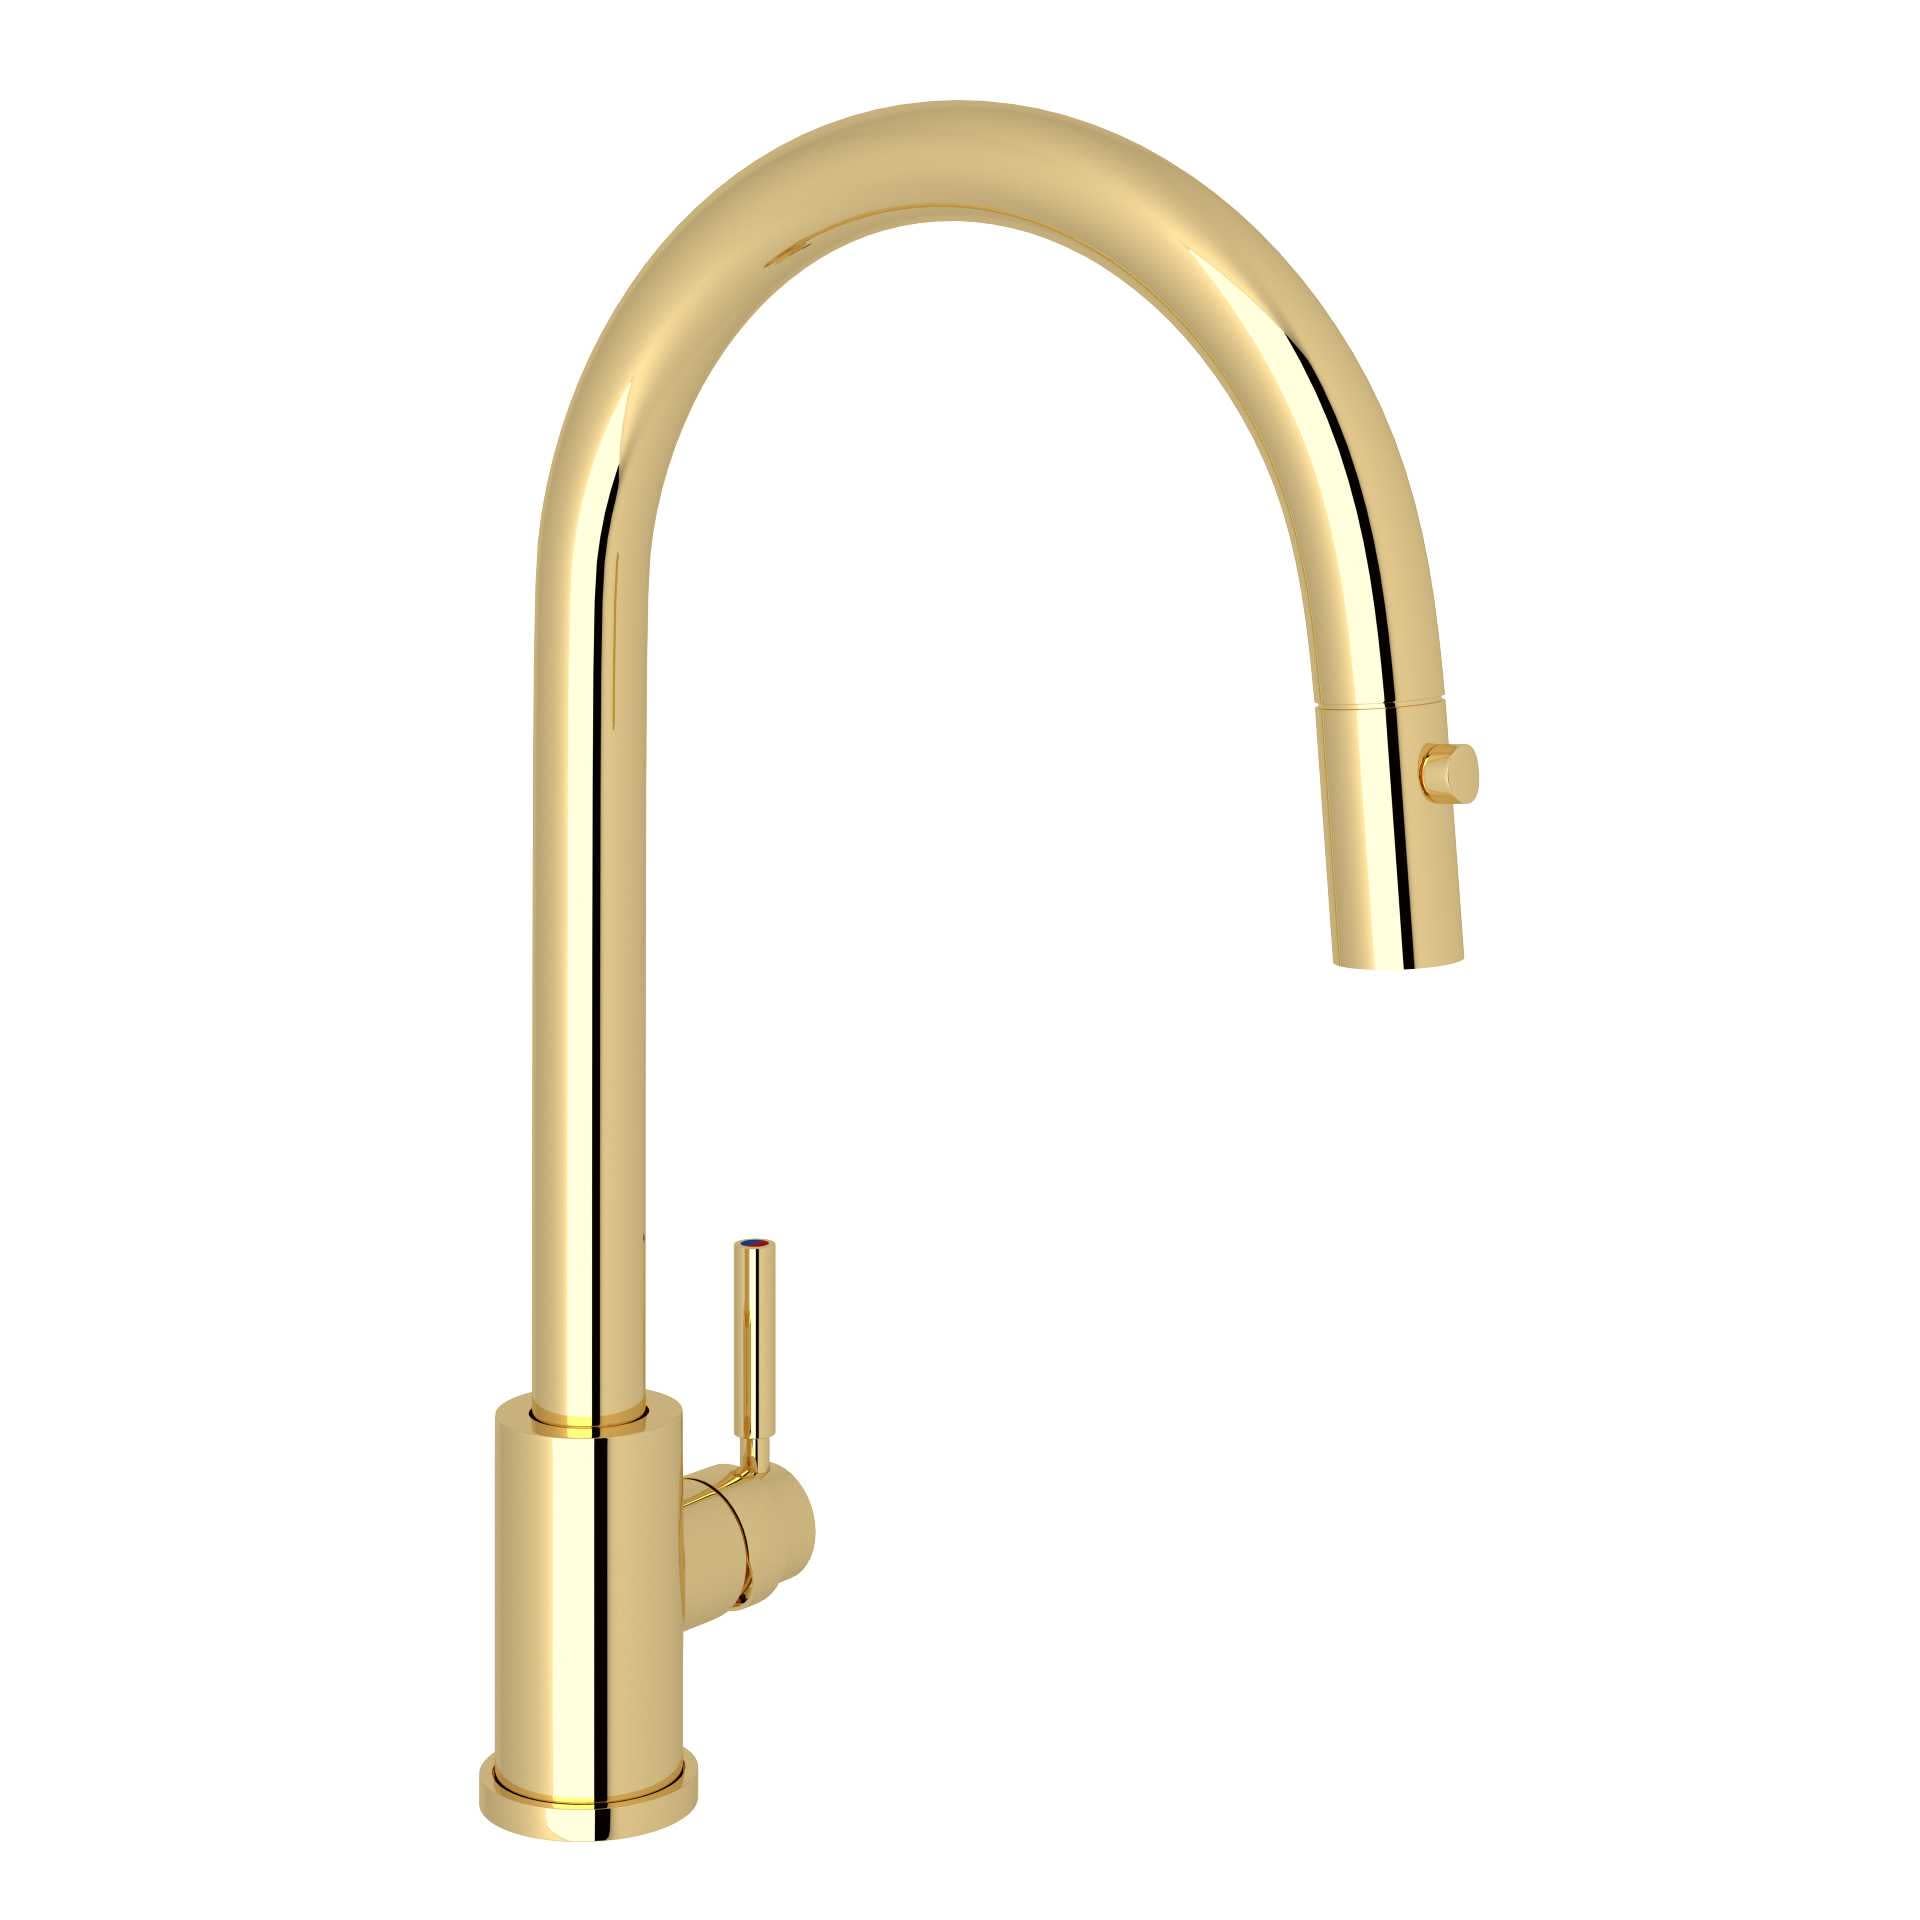 Rohl U.4044 Perrin & Rowe Holborn Pull Down Kitchen Faucet